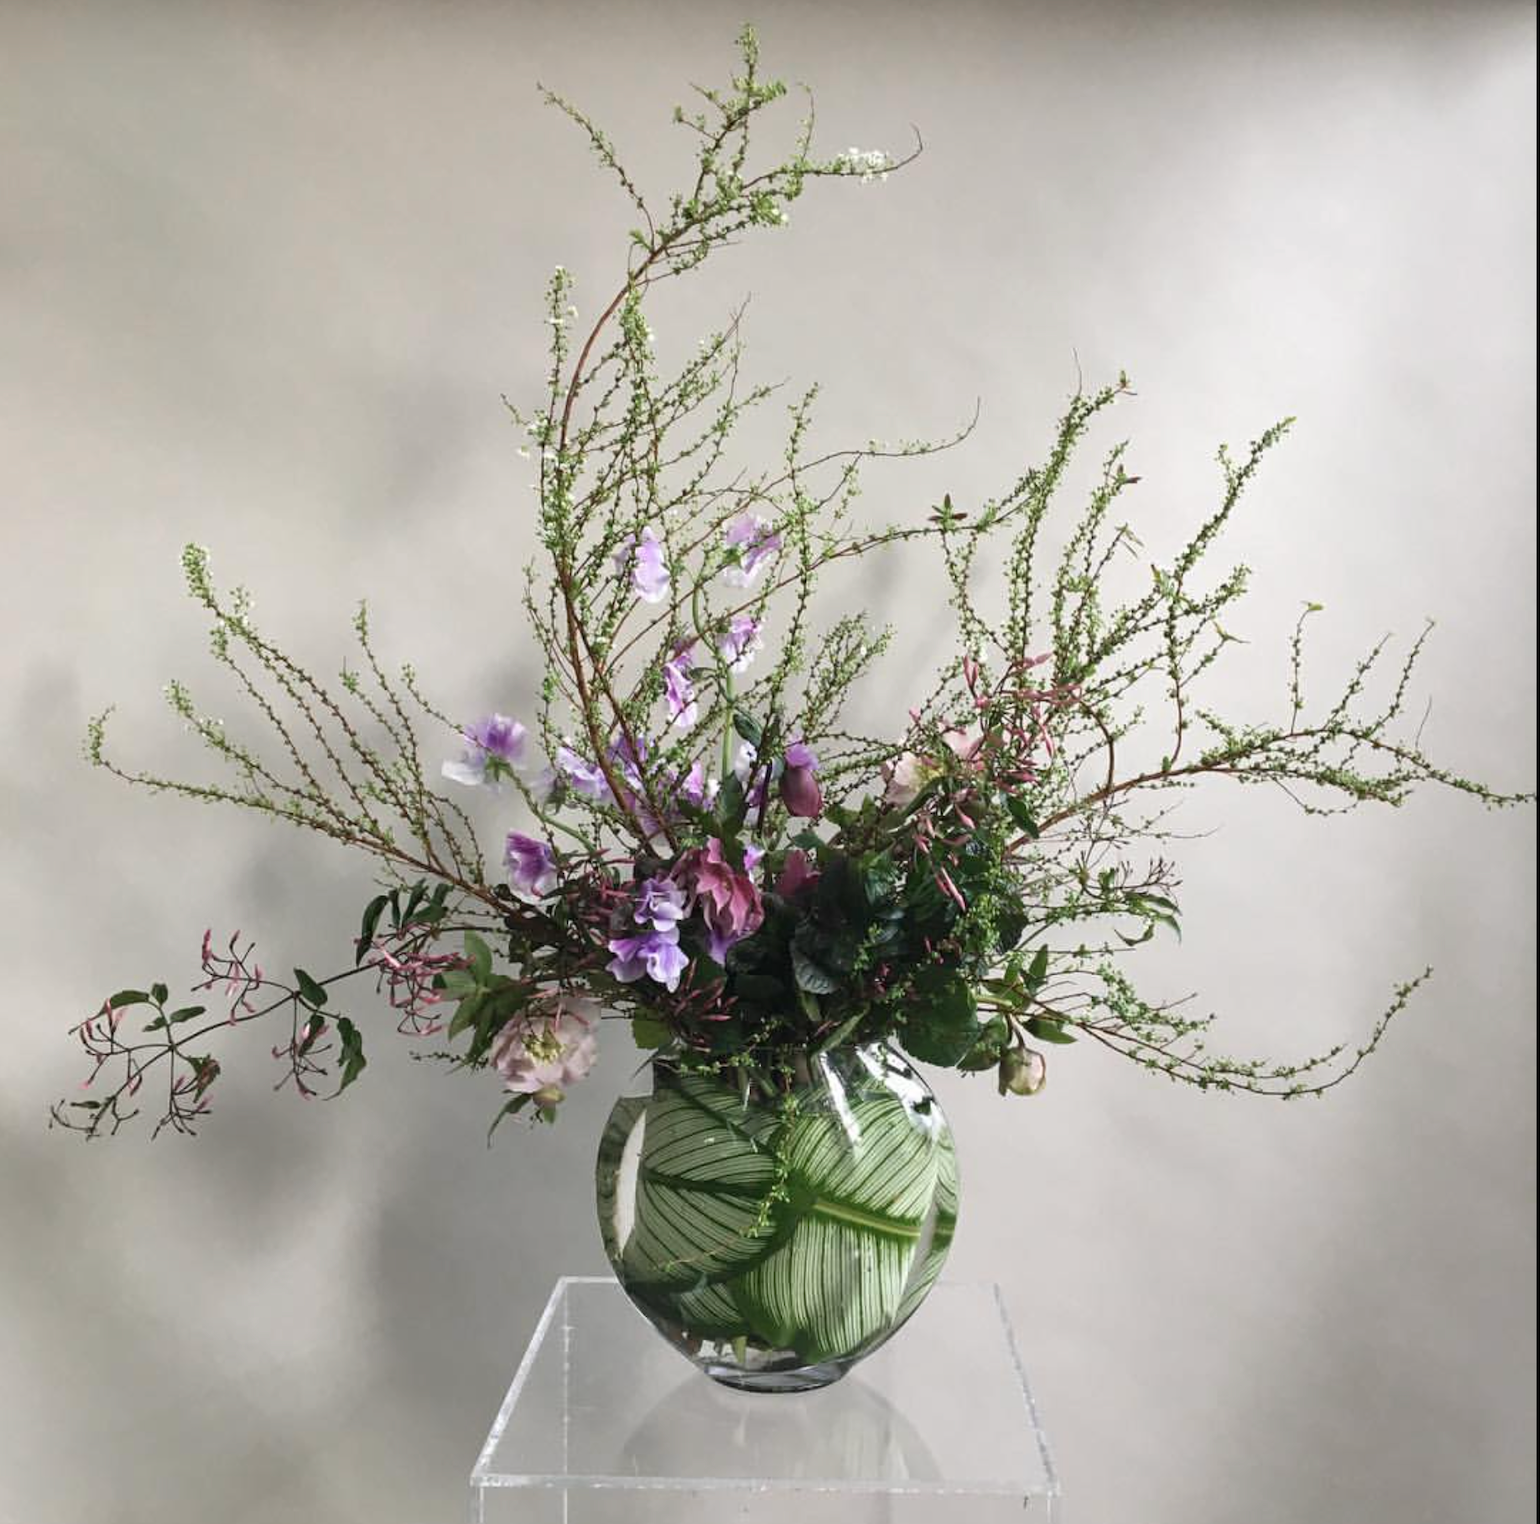 A botanical arrangement of ECCENTRIC flowers and greenery in a vase from TAKAYASATO.COM.